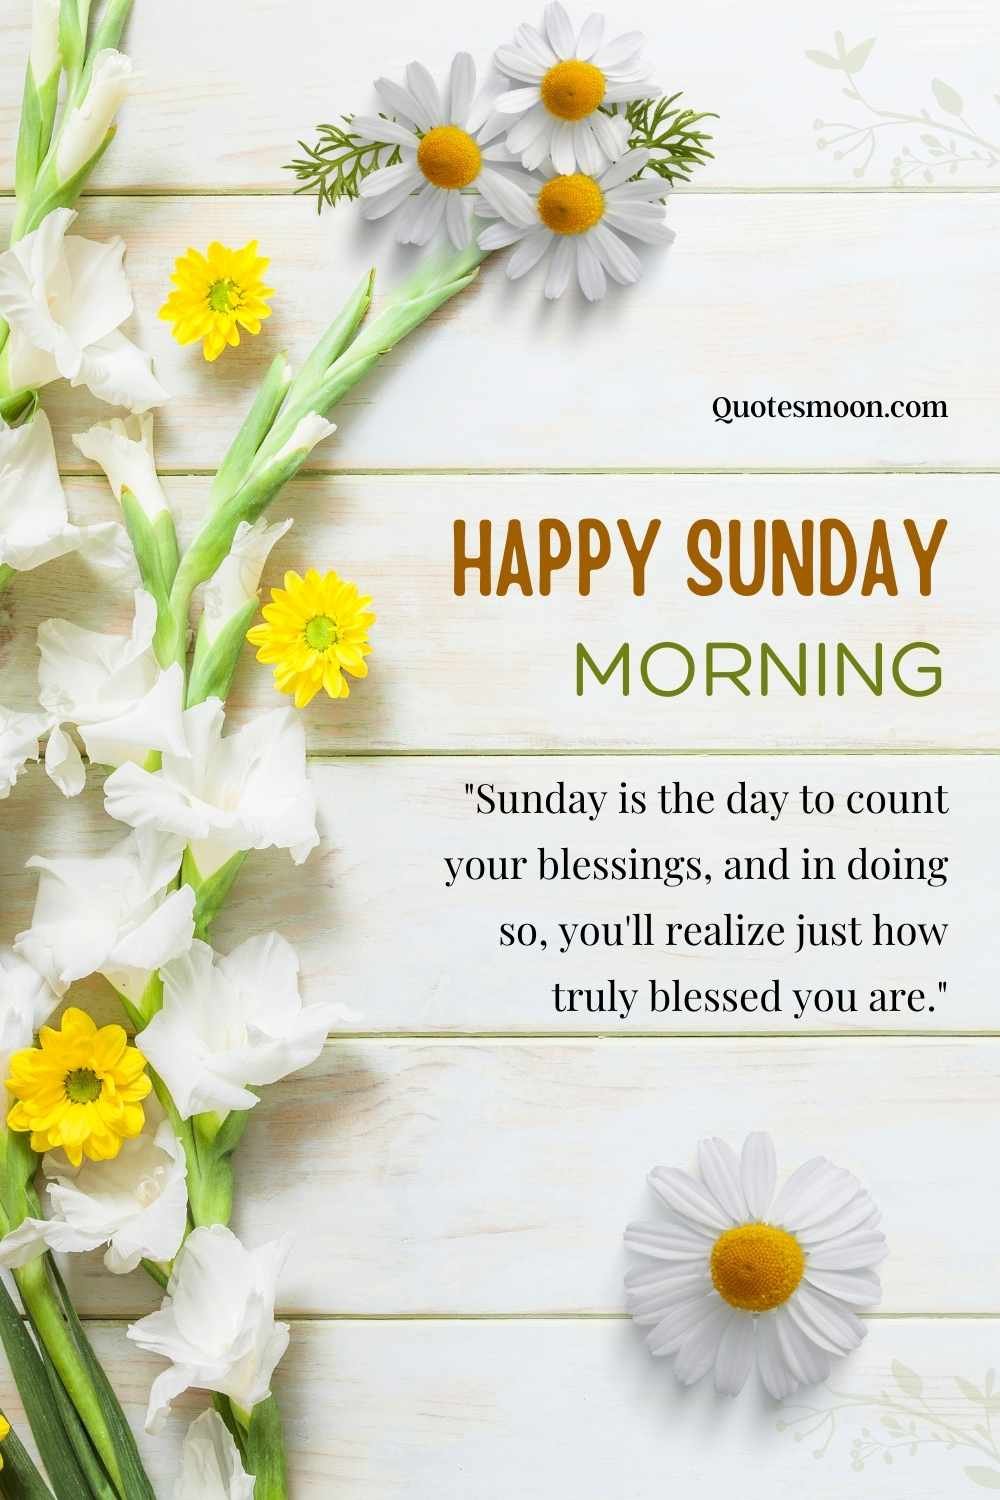 happy sunday wishes and images